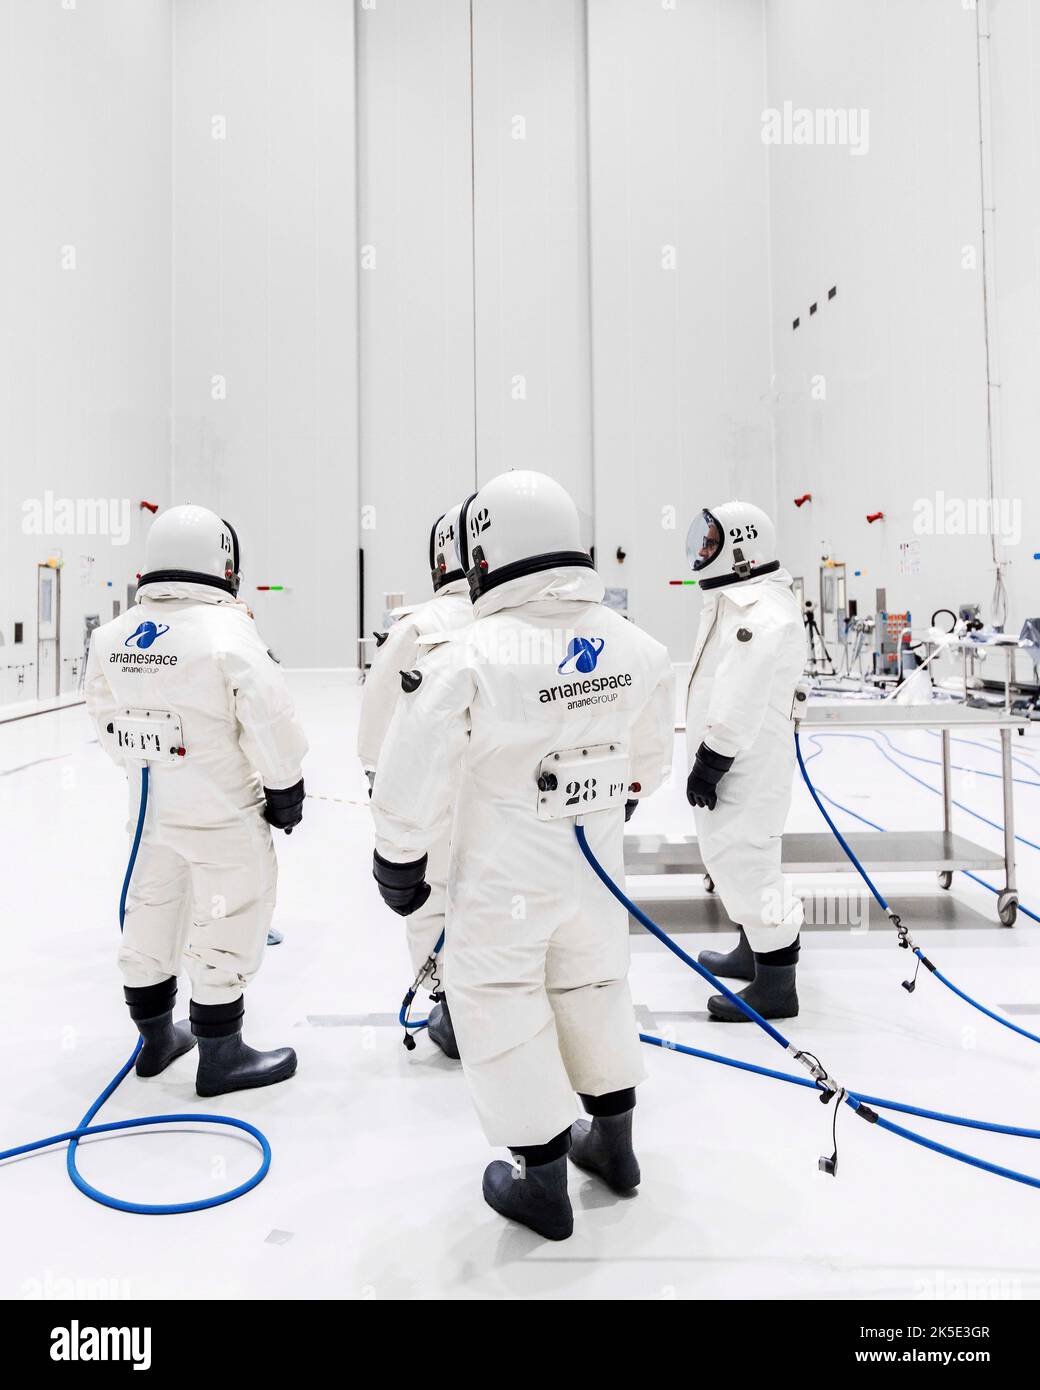 Fuelling Suits. James Webb Space Telescope (JWST) launch preparation at Europe's Spaceport in Kourou, French Guiana. Webb launched on 25 December 2021. This photo the fuelling team wears special hazard suits to protect them while fuelling the Ariane 5 spacecraft.  An optimised version of a NASA image by experienced lead photographer Chris Gunn. Credit: NASA/Chris Gunn. For editorial use only. Stock Photo